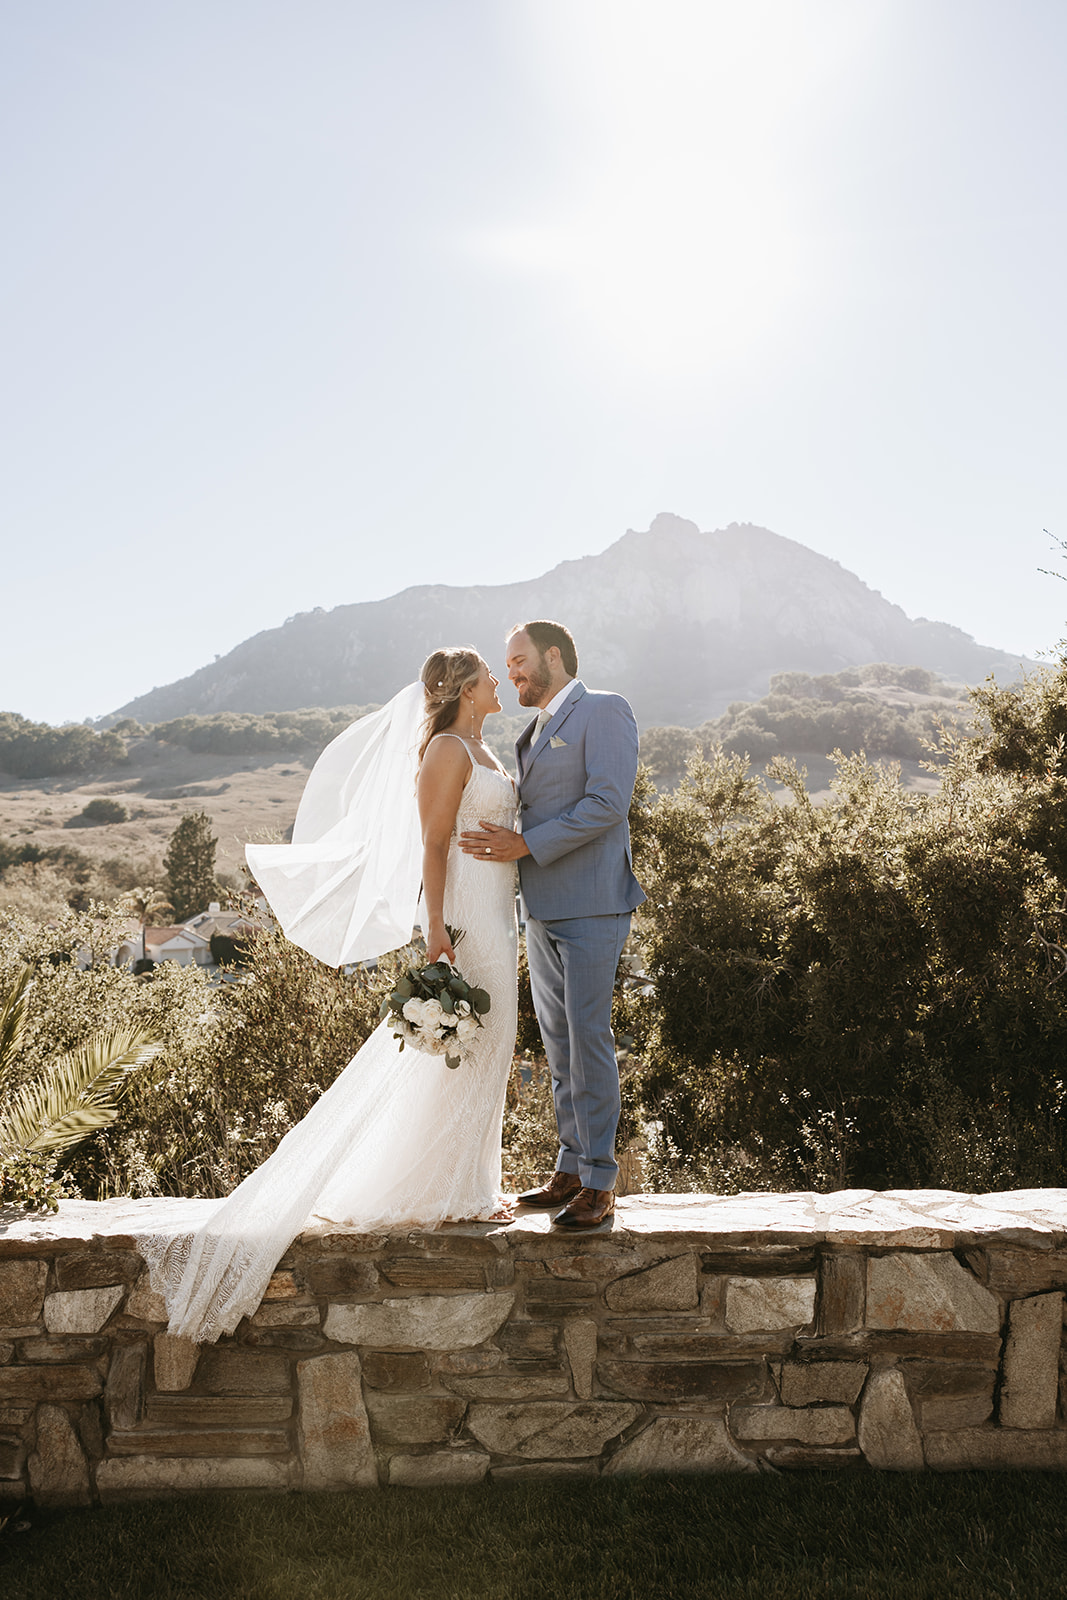 bride and groom walking on a ledge | The Penny: A Downtown Wedding Venue in San Luis Obispo